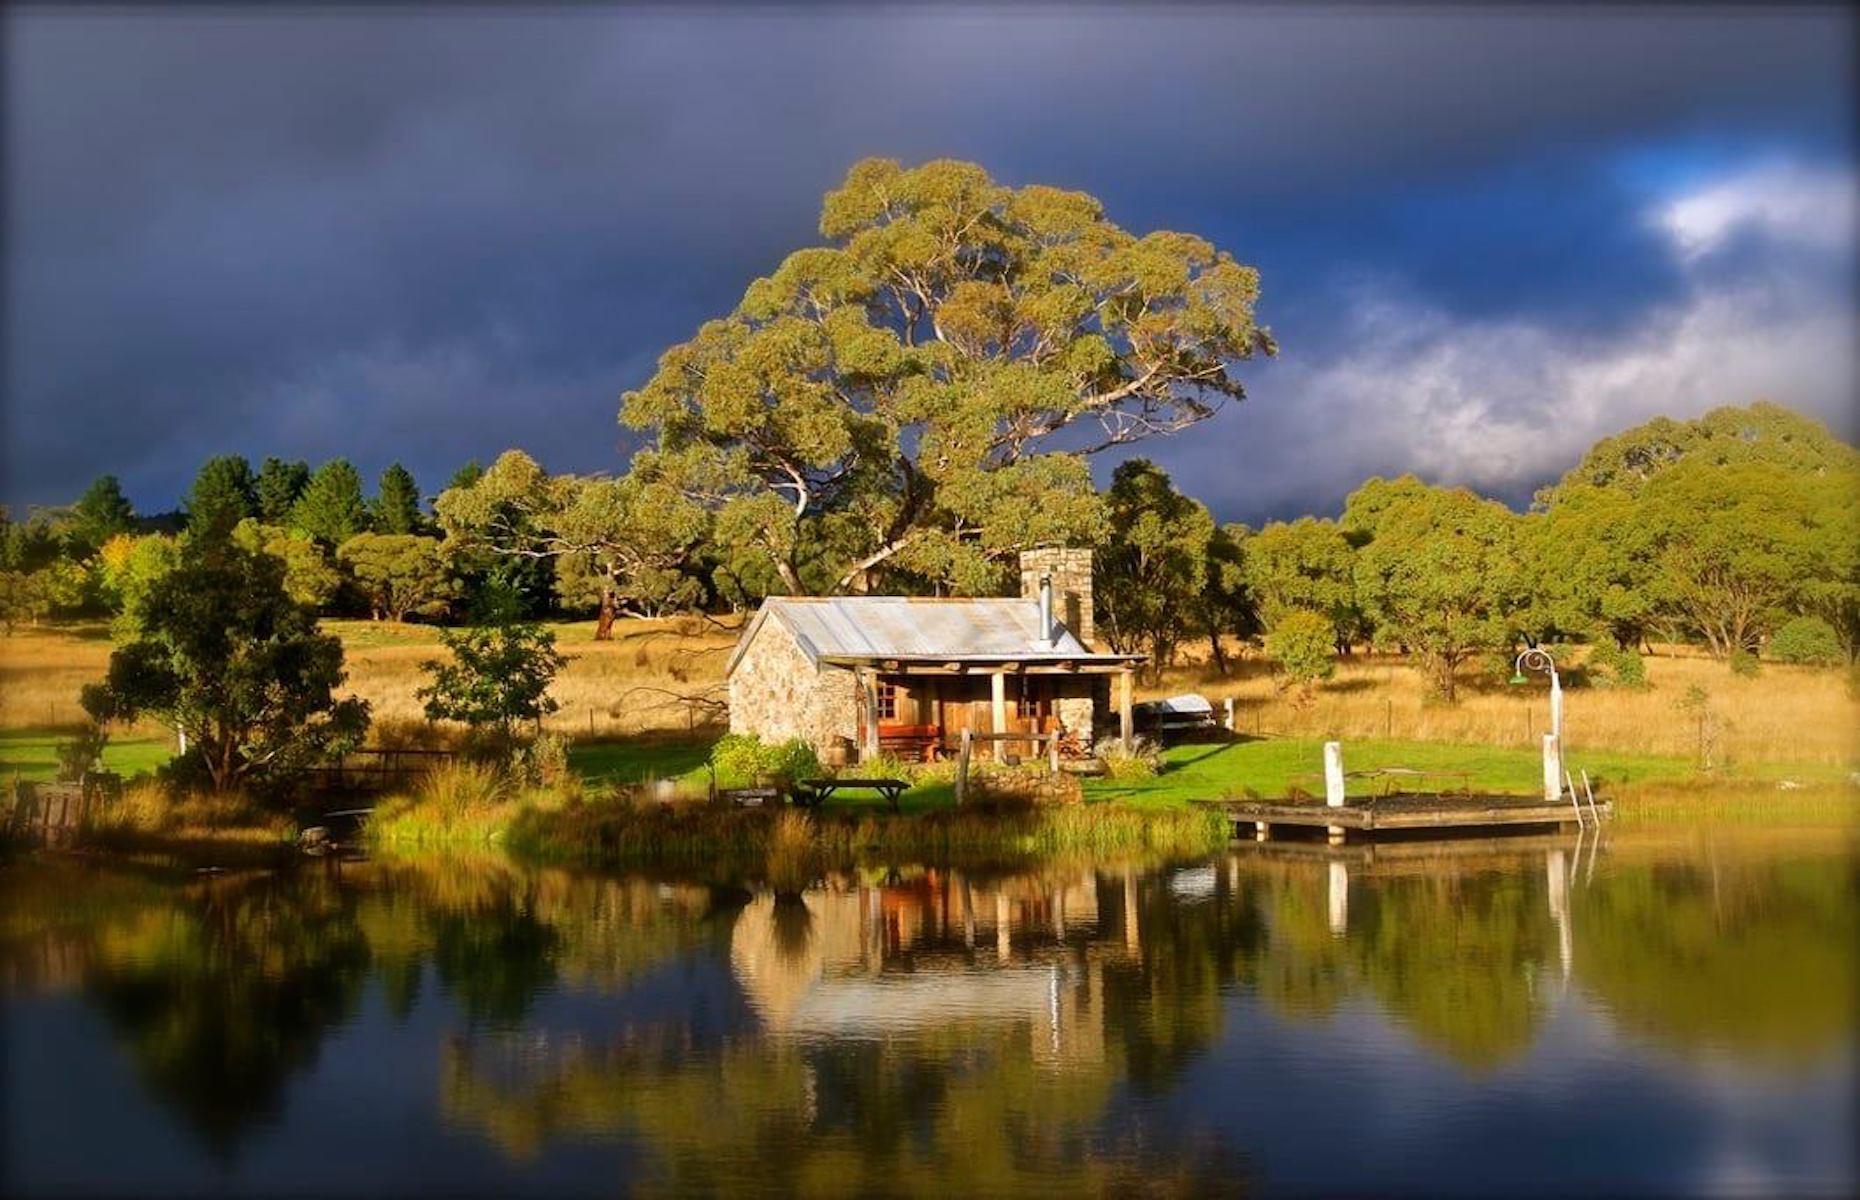 <p><a href="https://www.moonbahhut.com.au/">Two solitary cattlemen-style huts in the Snowy Mountains</a> make for the ultimate escape for anglers and anyone who loves the great outdoors. One hut is on the banks of the Moonbah River and the other is on the edge of small private lake, well stocked with brown, rainbow and brook trout. Inside the timber-beamed cabins it's a traditional and cozy scene with antique iron beds and wood-fired cooking stoves along with underfloor heating. The mountain retreats also have verandas with rocking chairs for listening to the chirruping frogs and watching the sunset.</p>